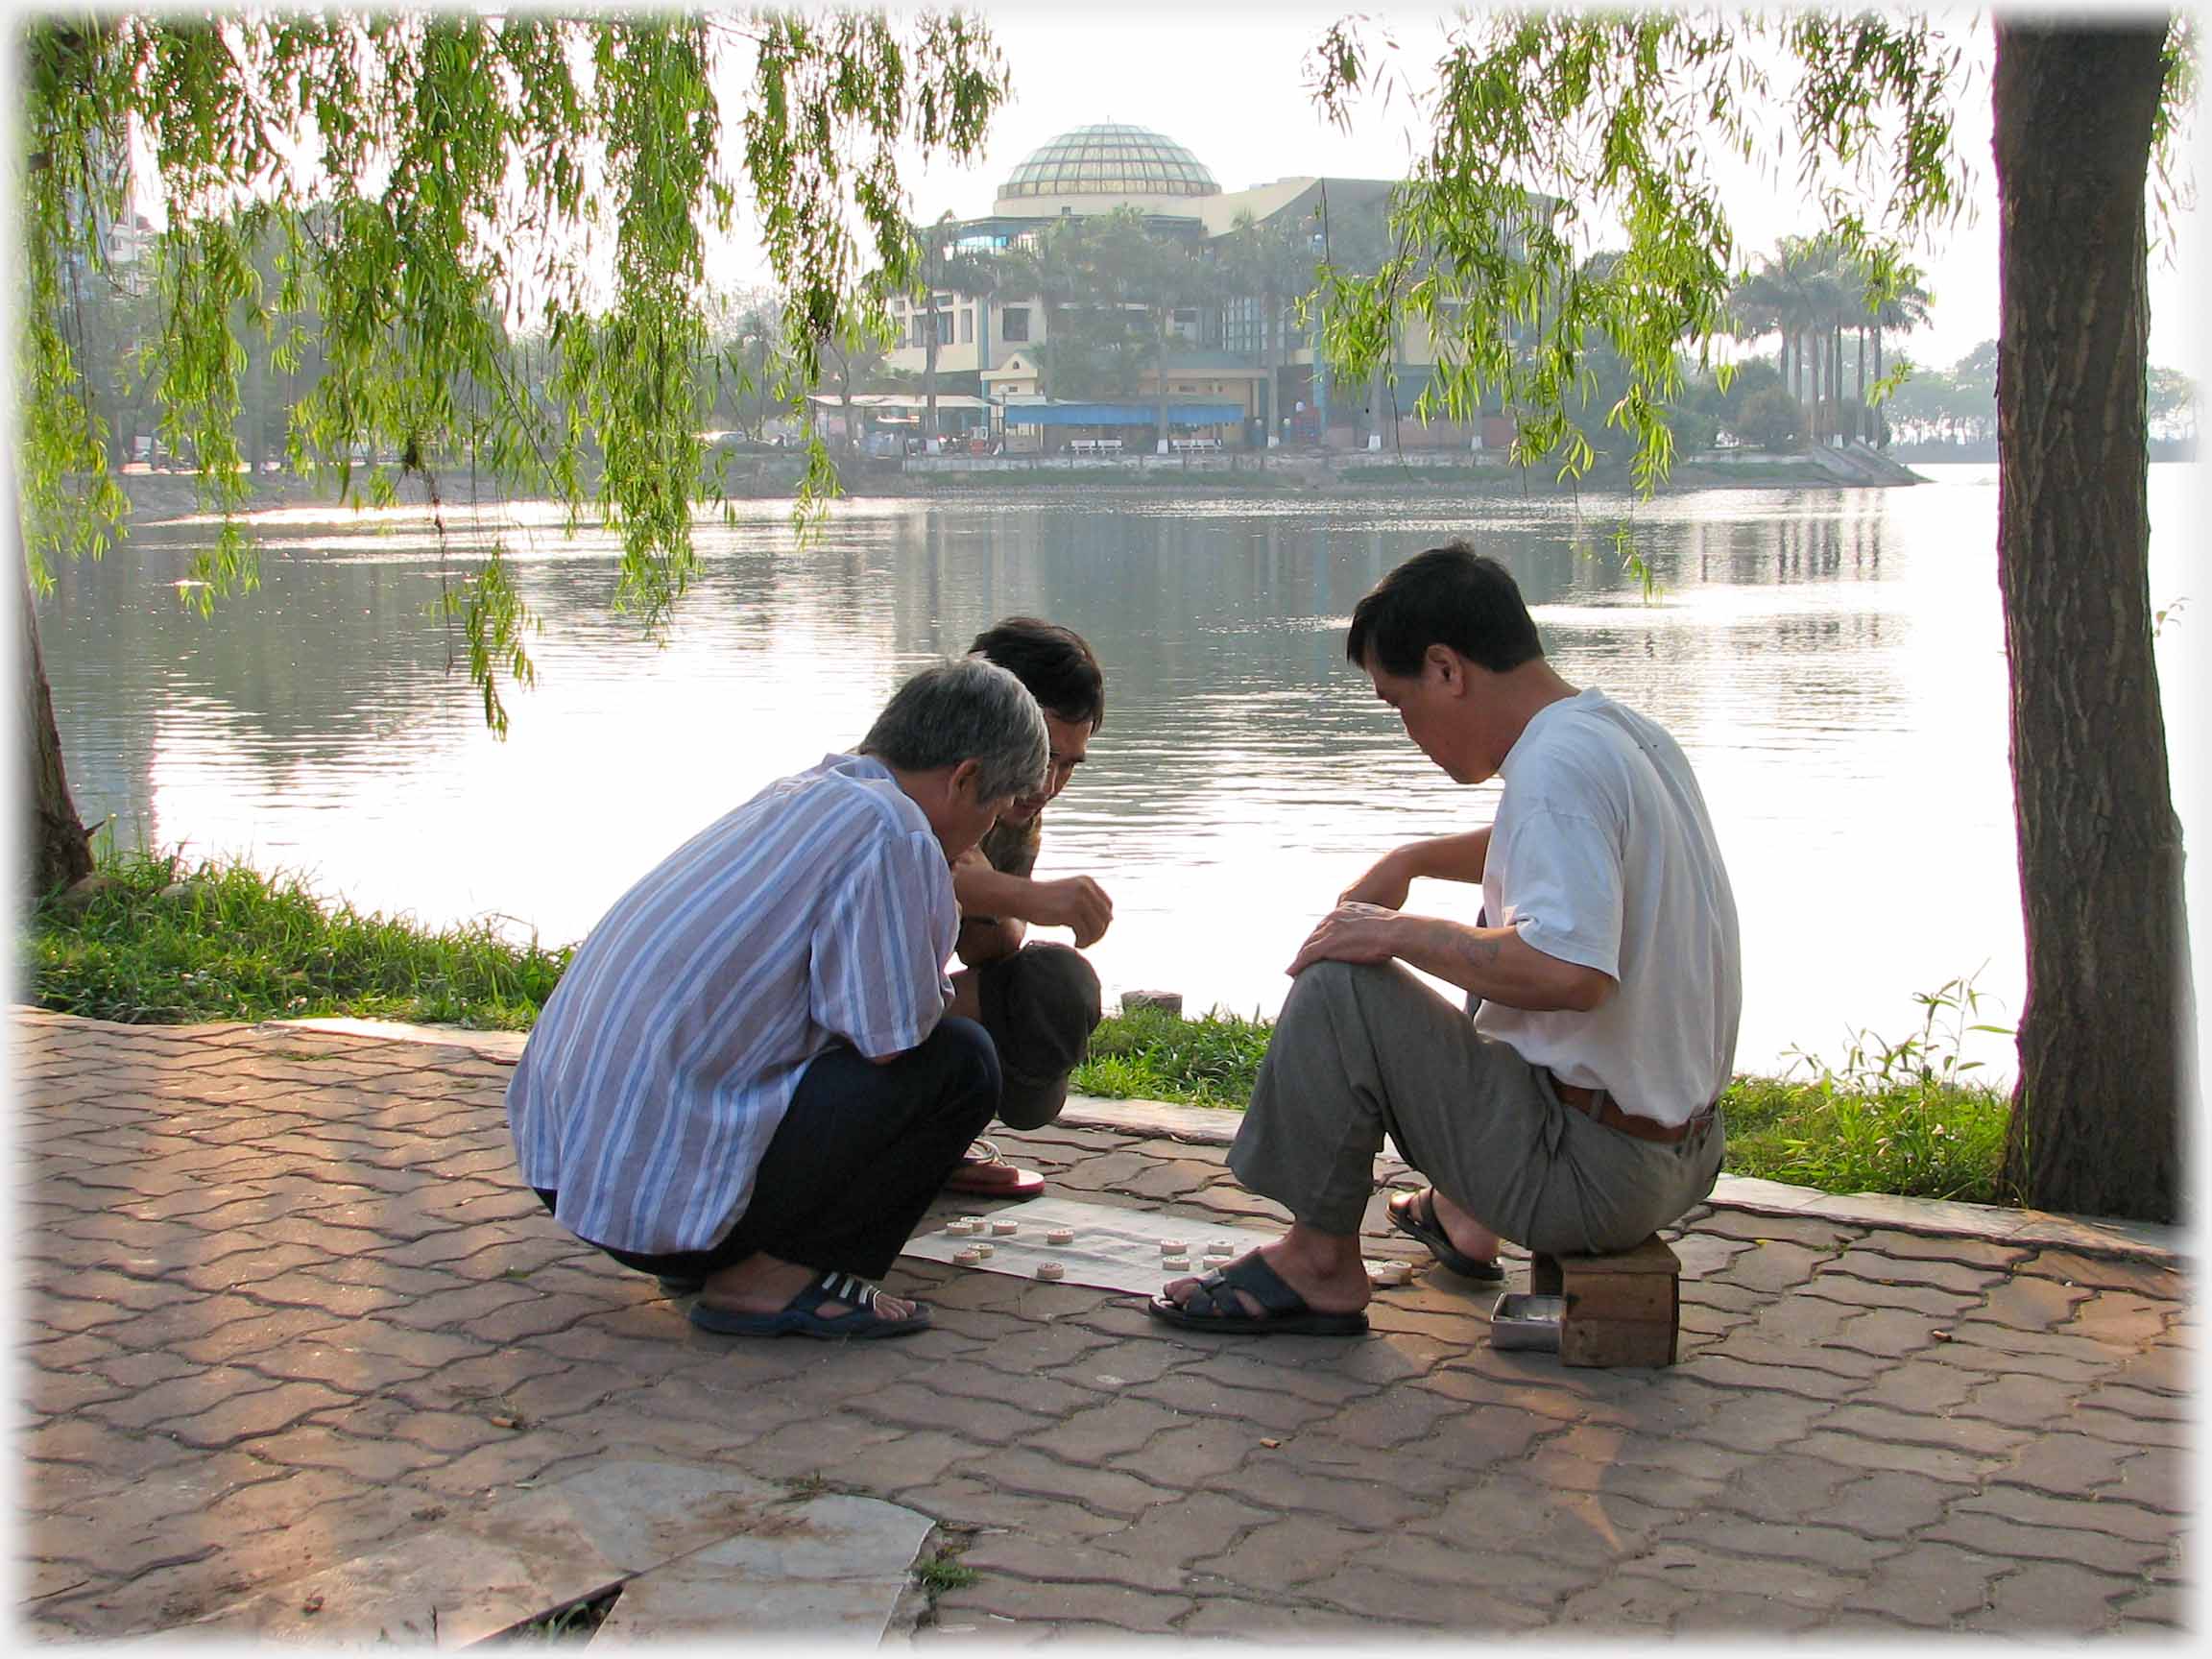 Three men and paper 'board' by lake, one on small stool.